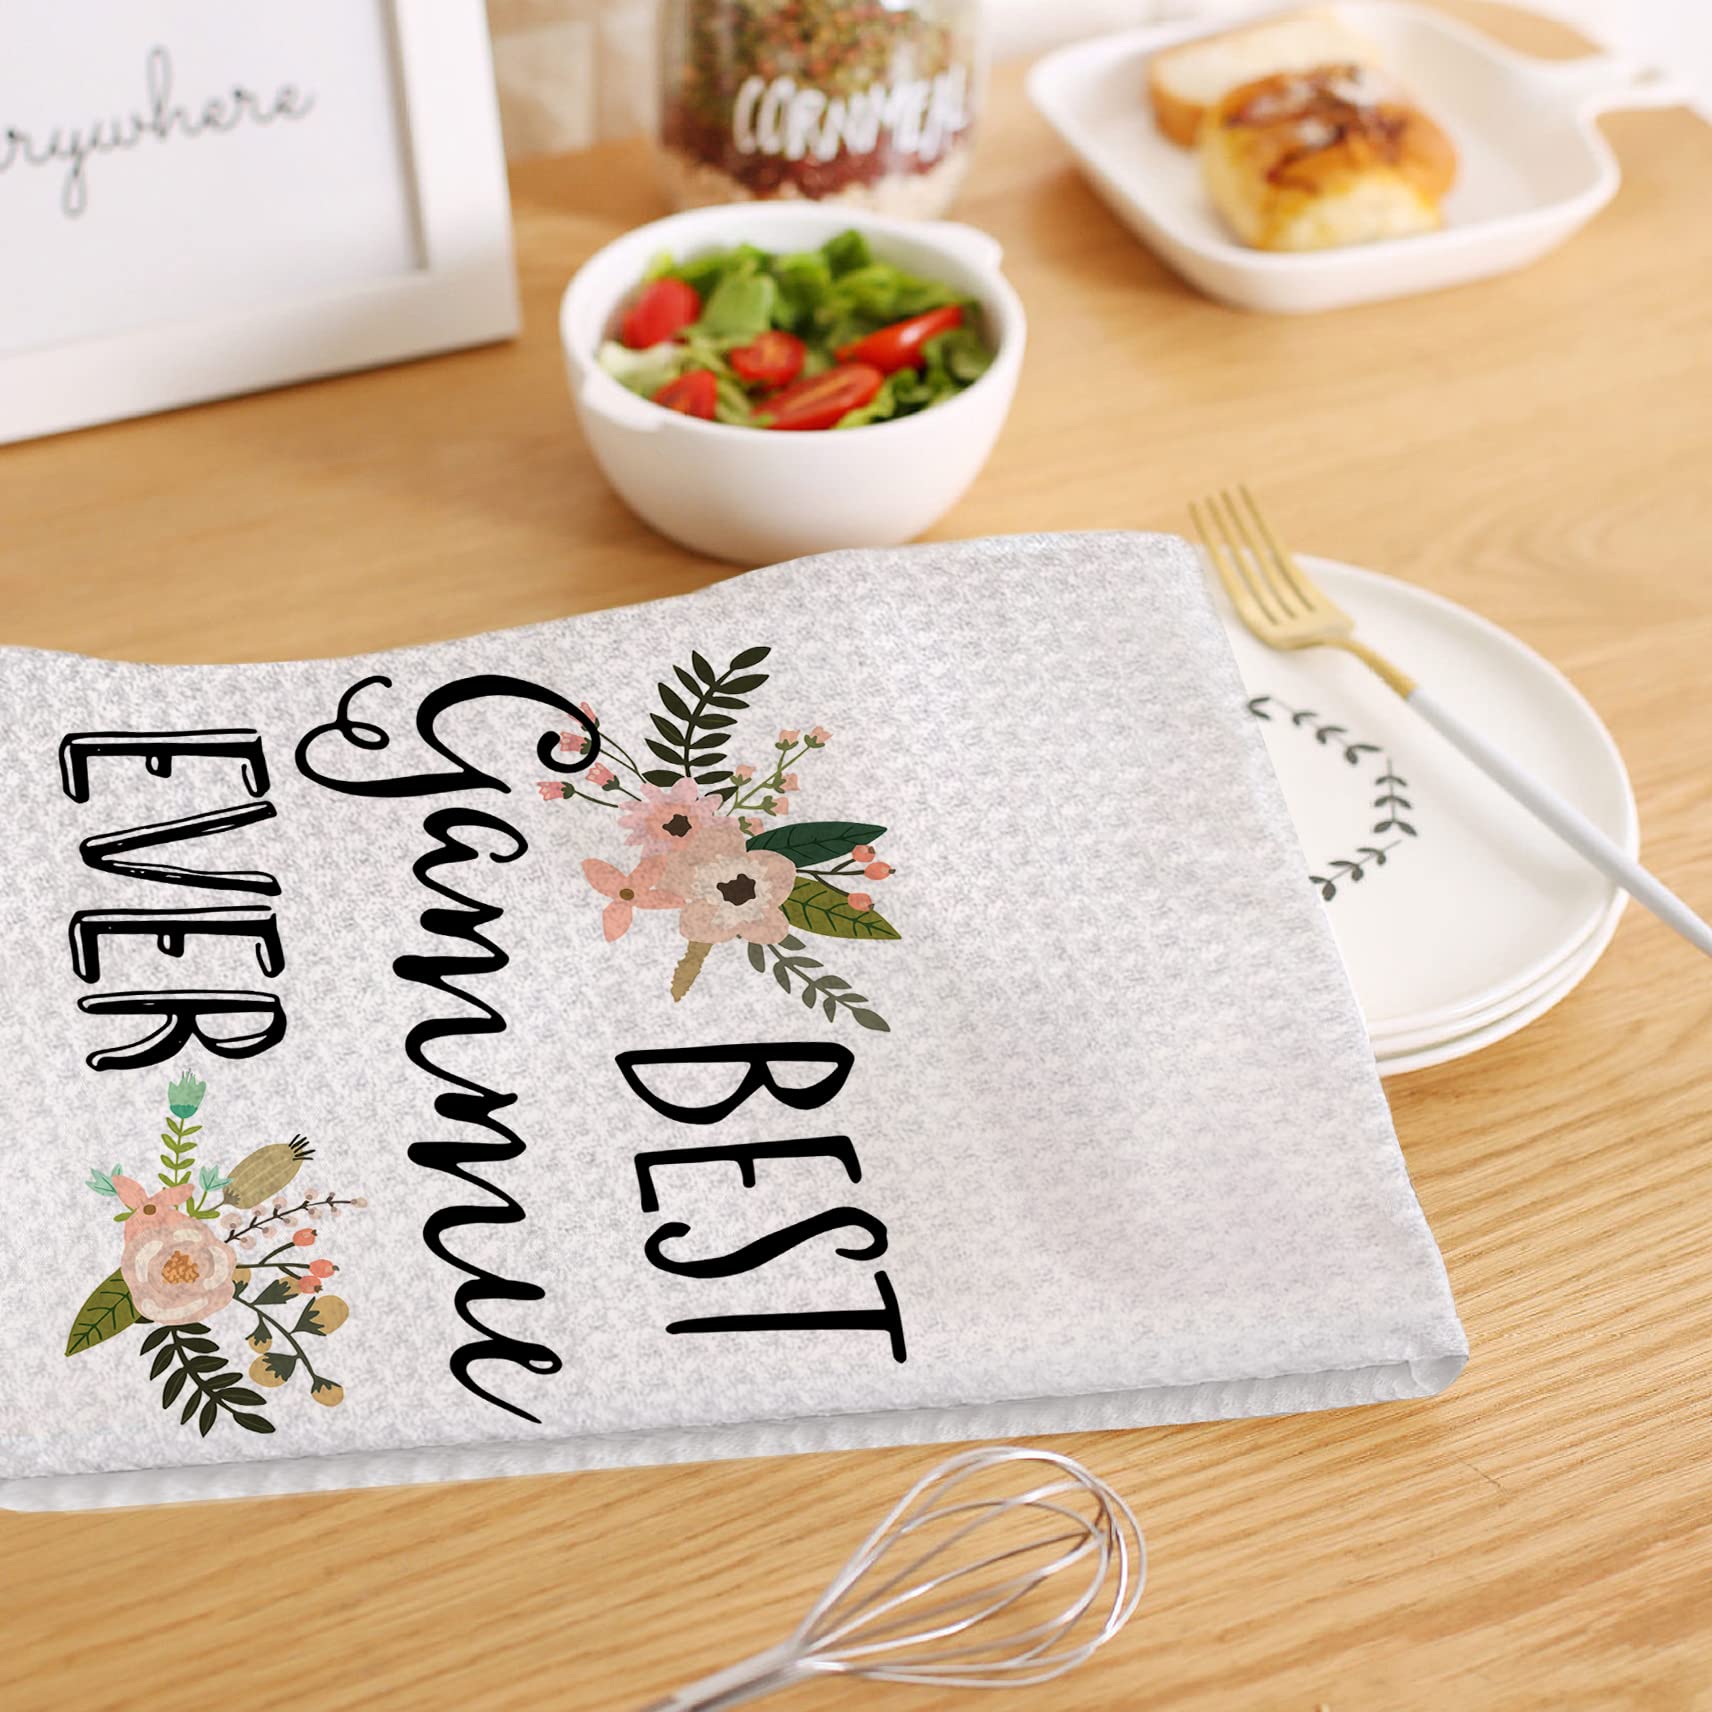 HIWX Best Gammie Ever Decorative Kitchen Towels and Dish Towels, Watercolor Boho Floral Gammie Grandma Mother's Day Hand Towels Tea Towel for Bathroom Kitchen Decor 16×24 Inches